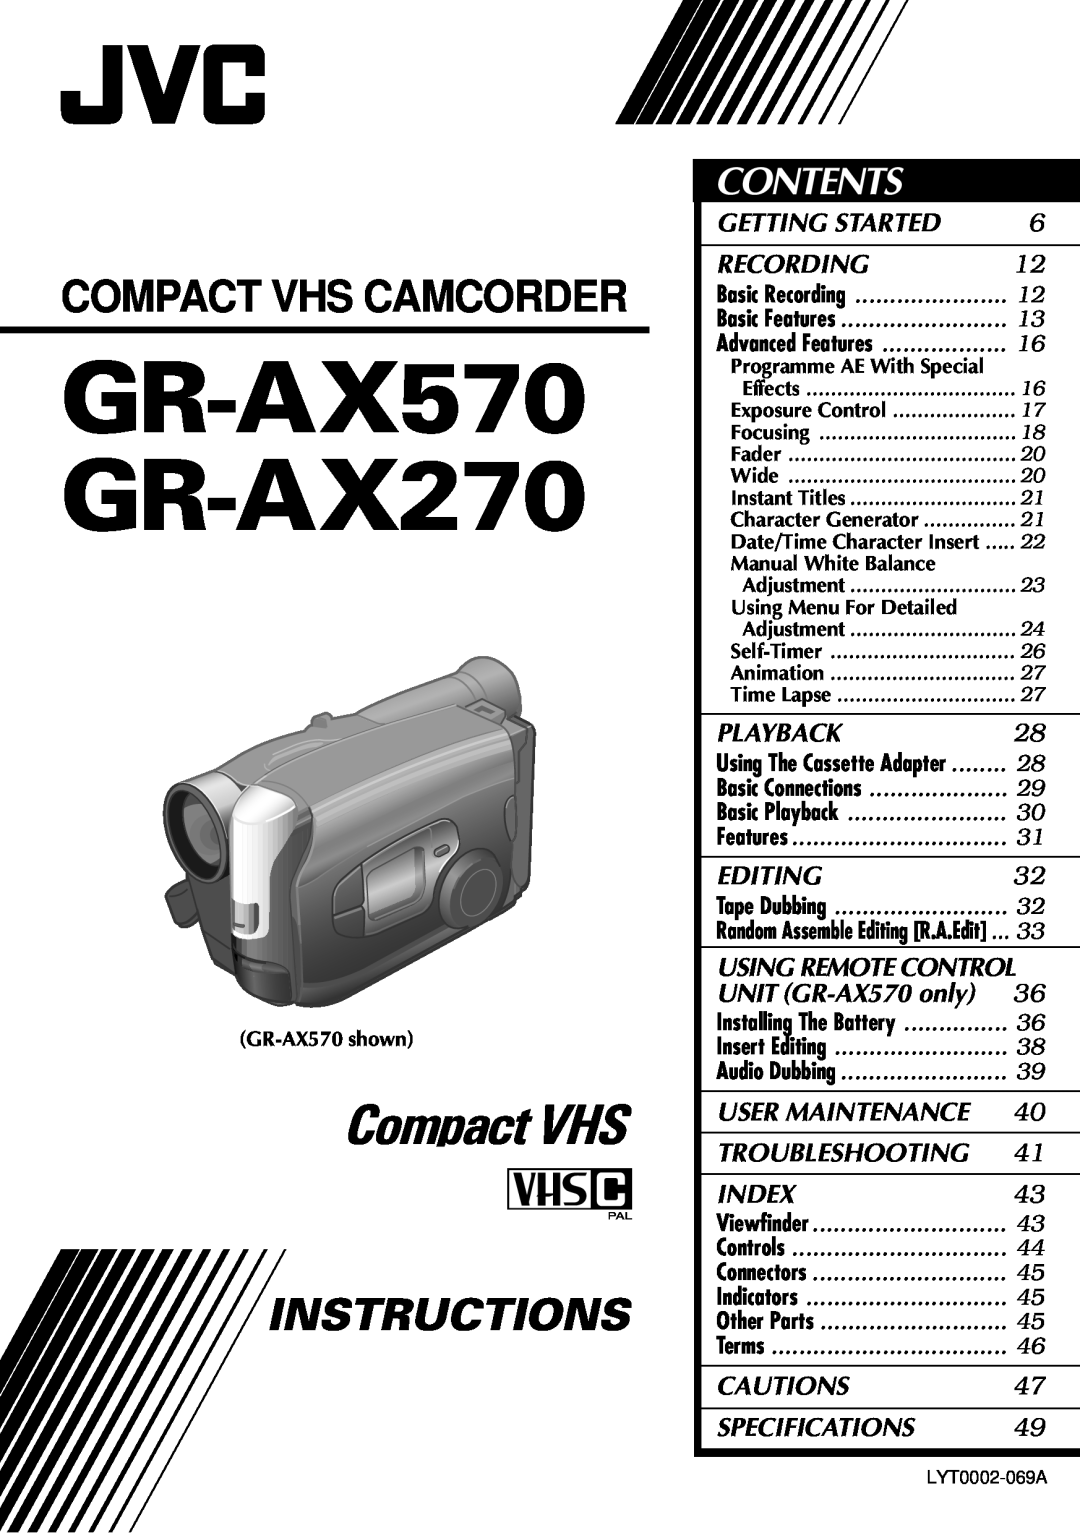 JVC specifications Contents, GR-AX570 GR-AX270, Compact VHS, Compact Vhs Camcorder, Instructions 